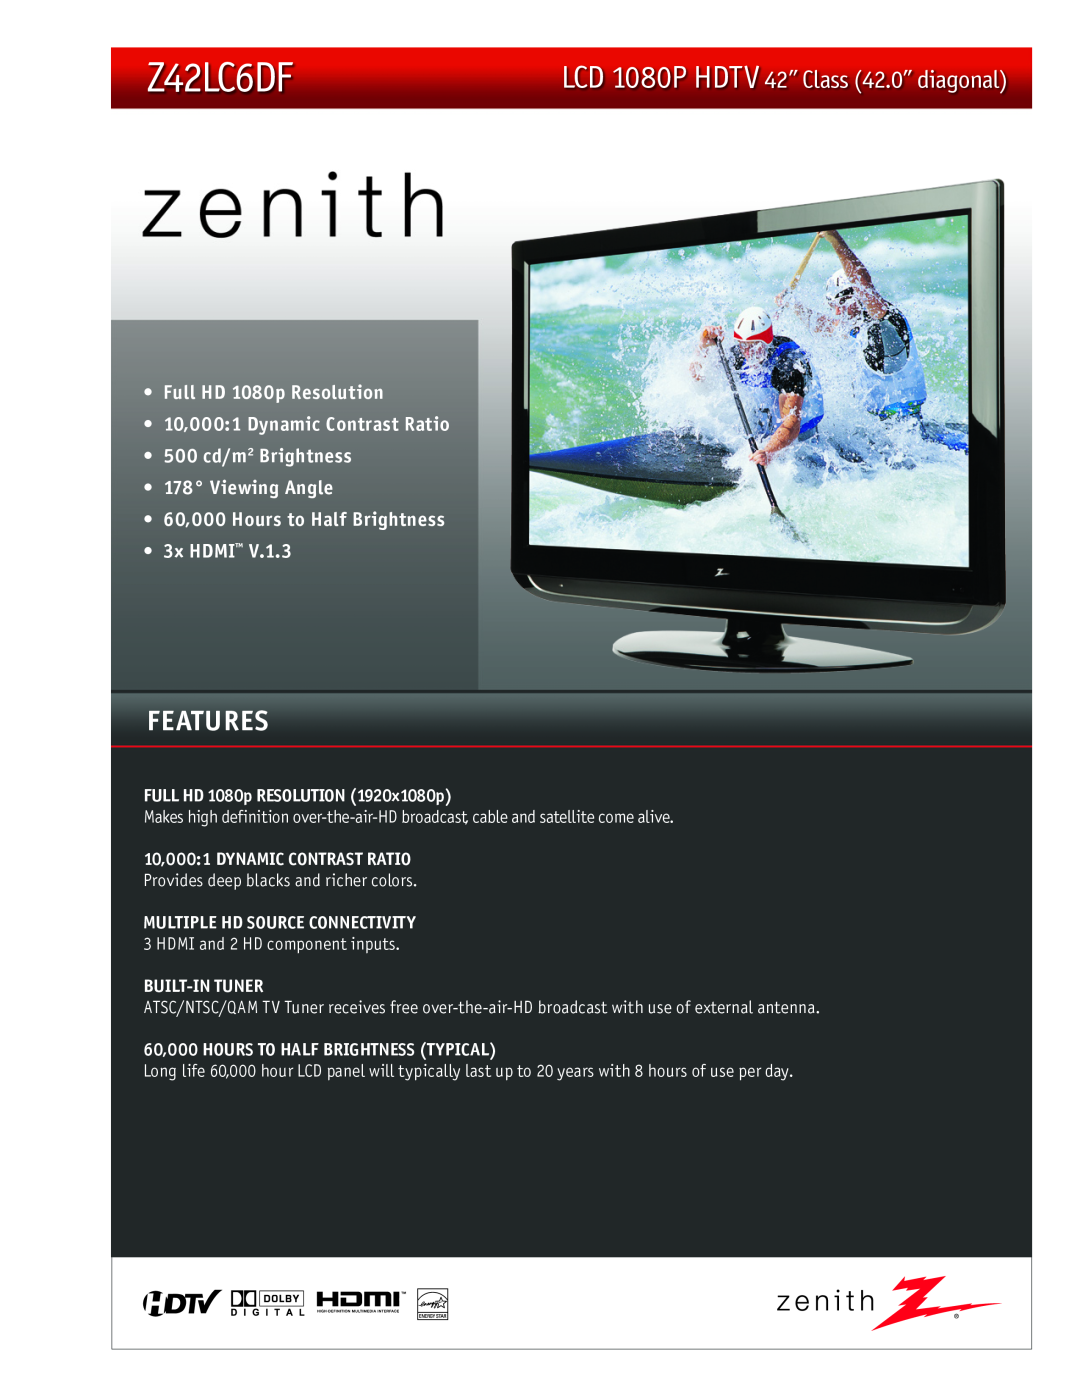 Zenith Z42LC6DF manual Full HD 1080p Resolution 1920x1080p, 10,0001 Dynamic contrast ratio, Built-In Tuner, Features 